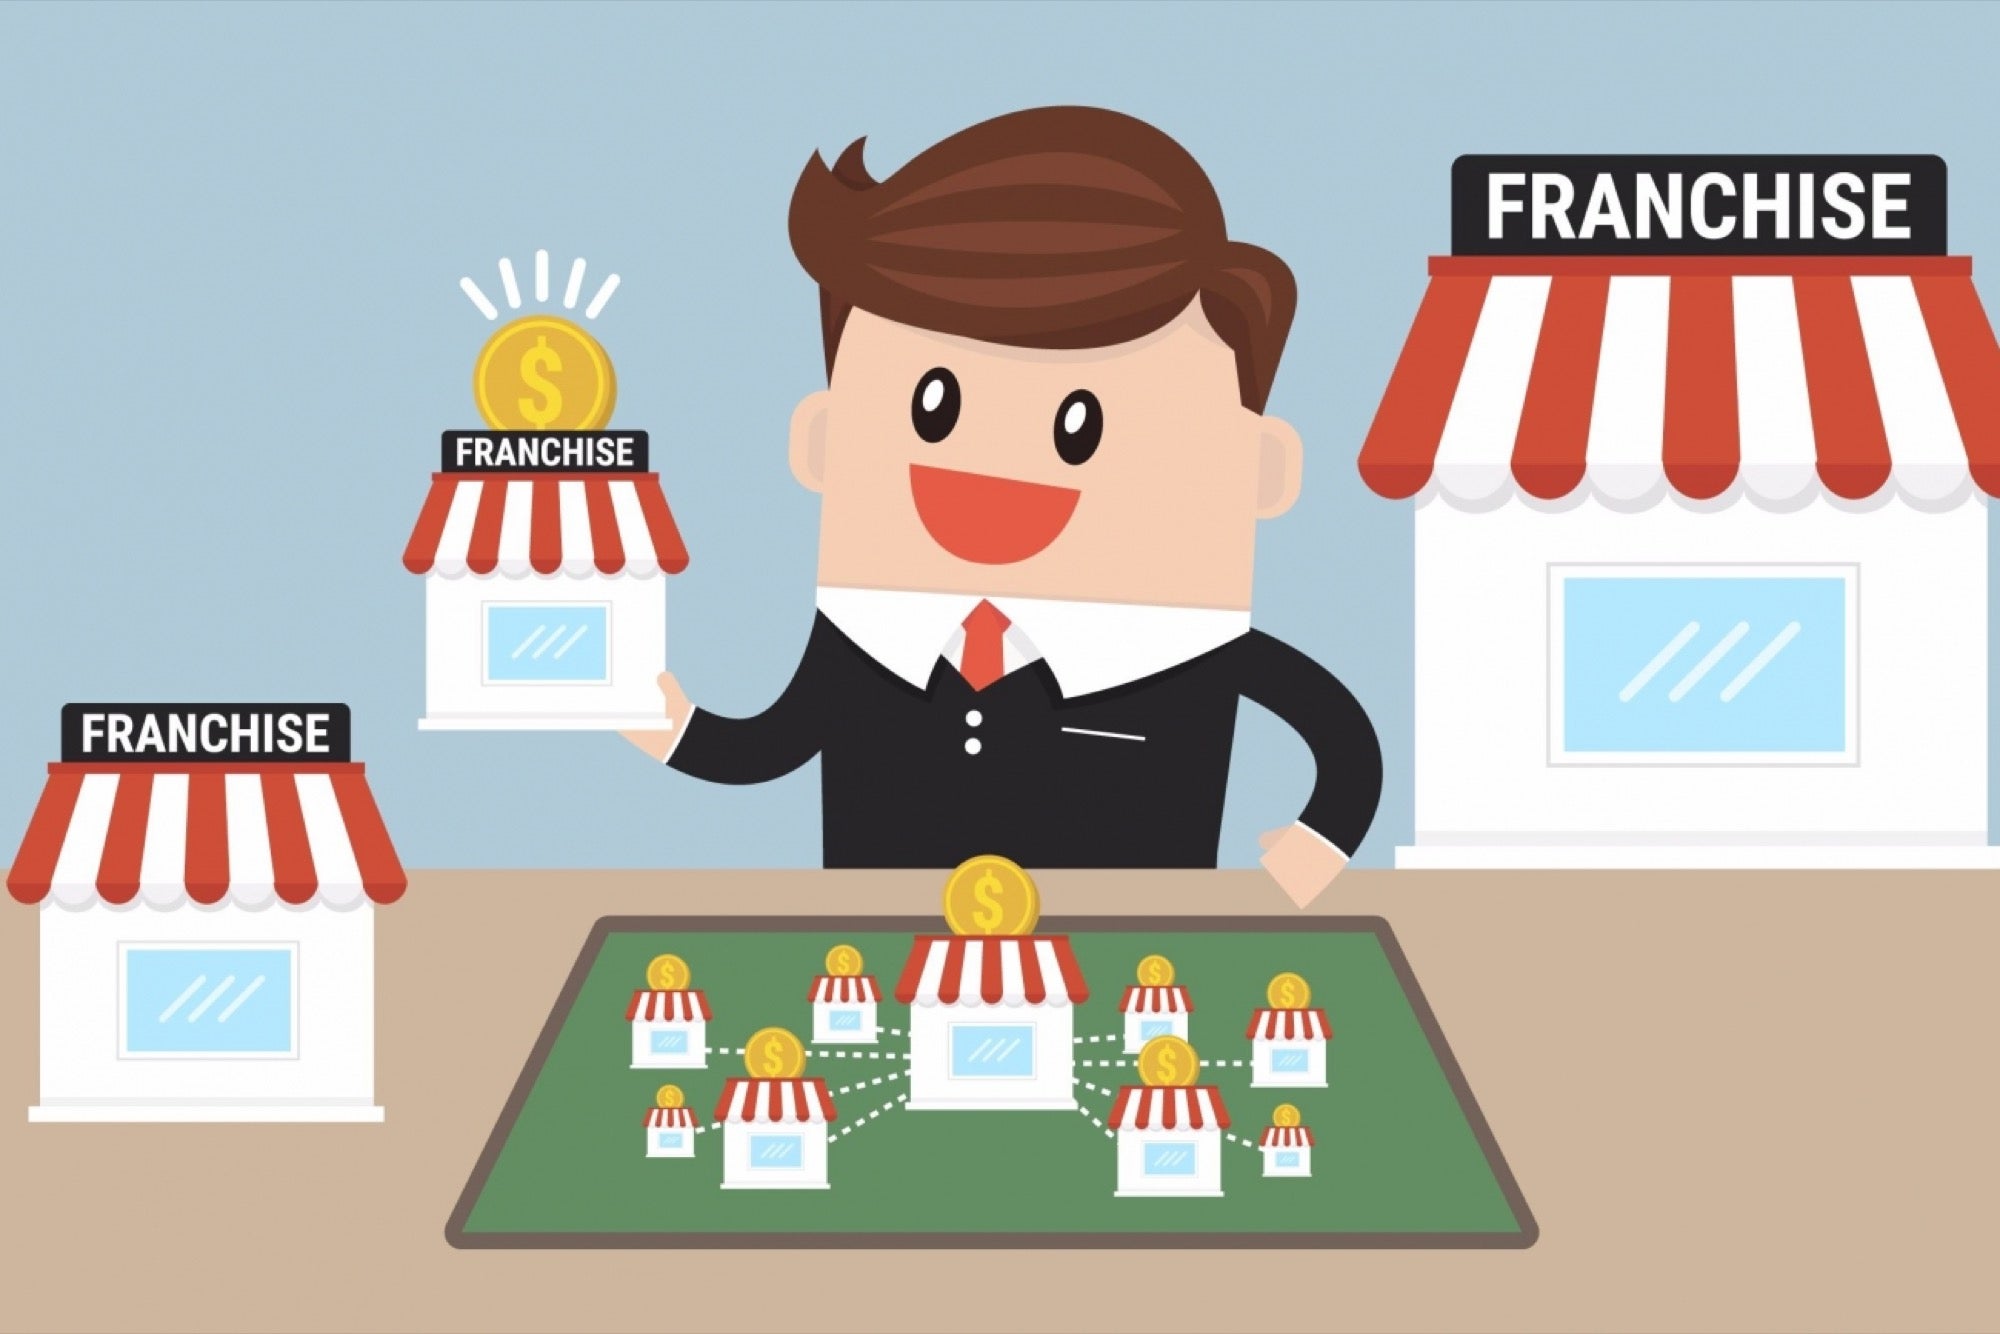 Top Five Most Profitable Franchise Businesses In the U.S.